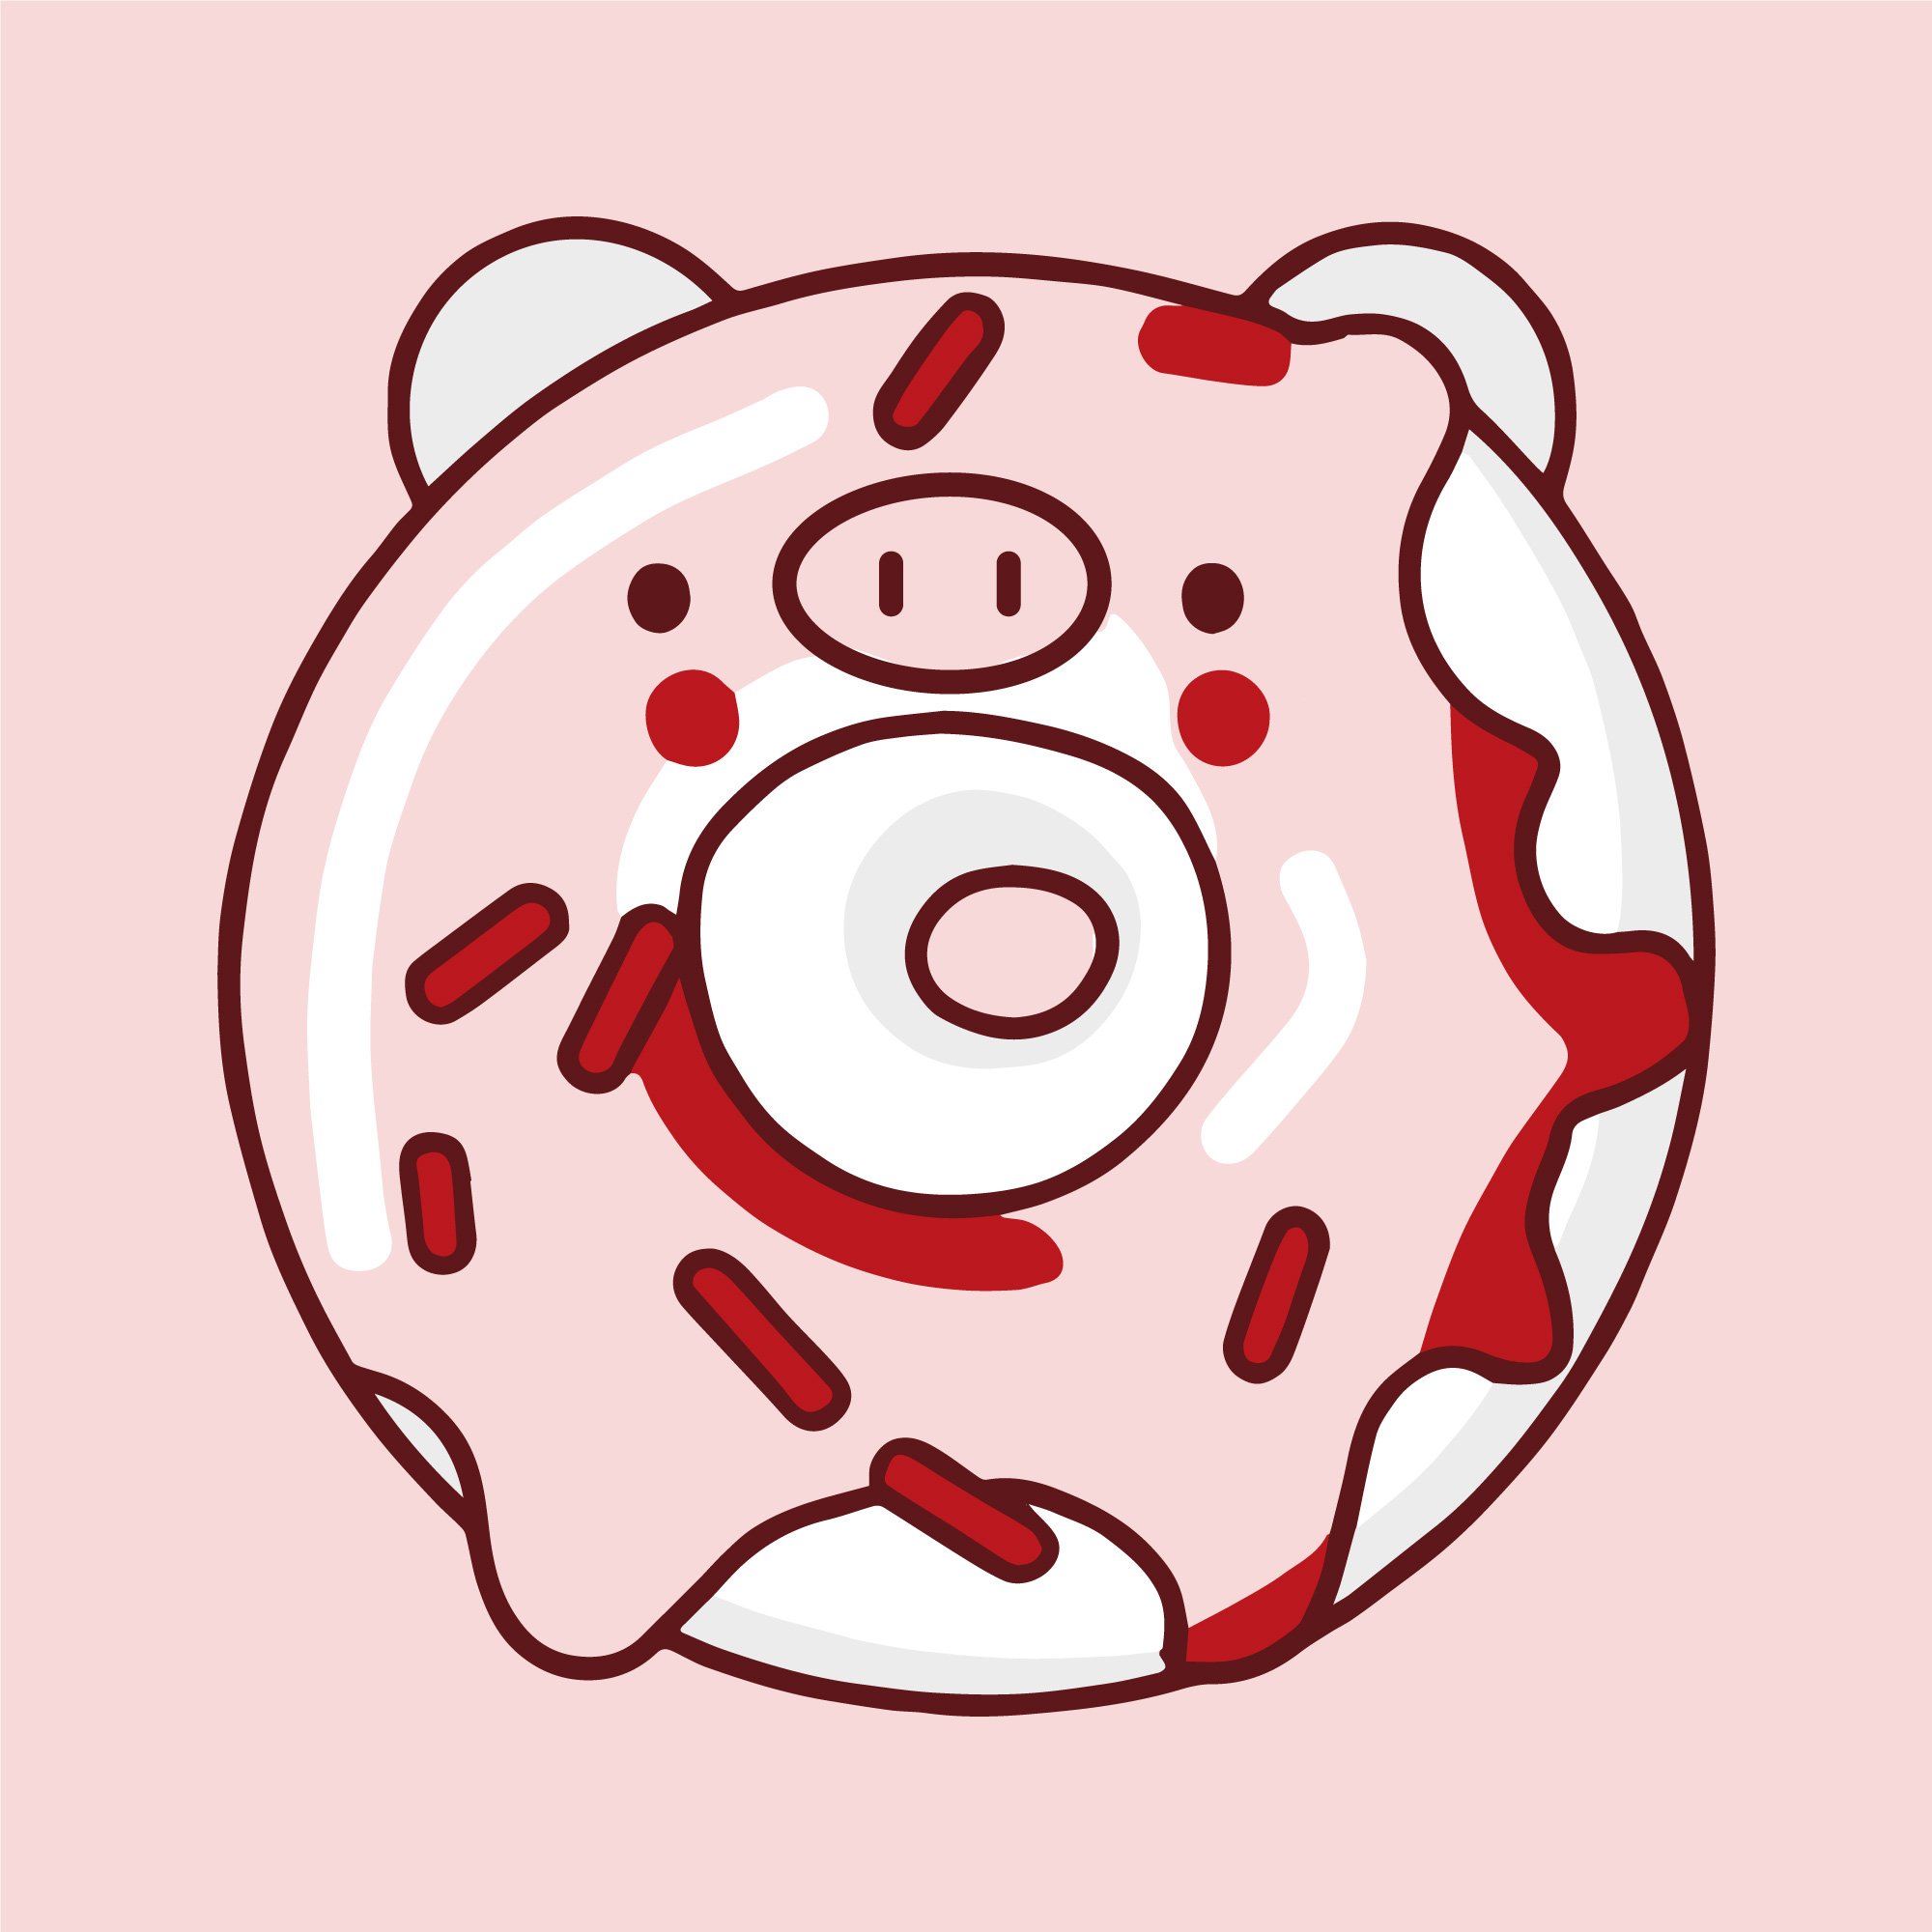 Buttercrumble-Edited---DALL-E-2022-11-11-15.25.54---A-kawaii-illustration-of-a-pig-shaped-doughnut-in-pink.jpg